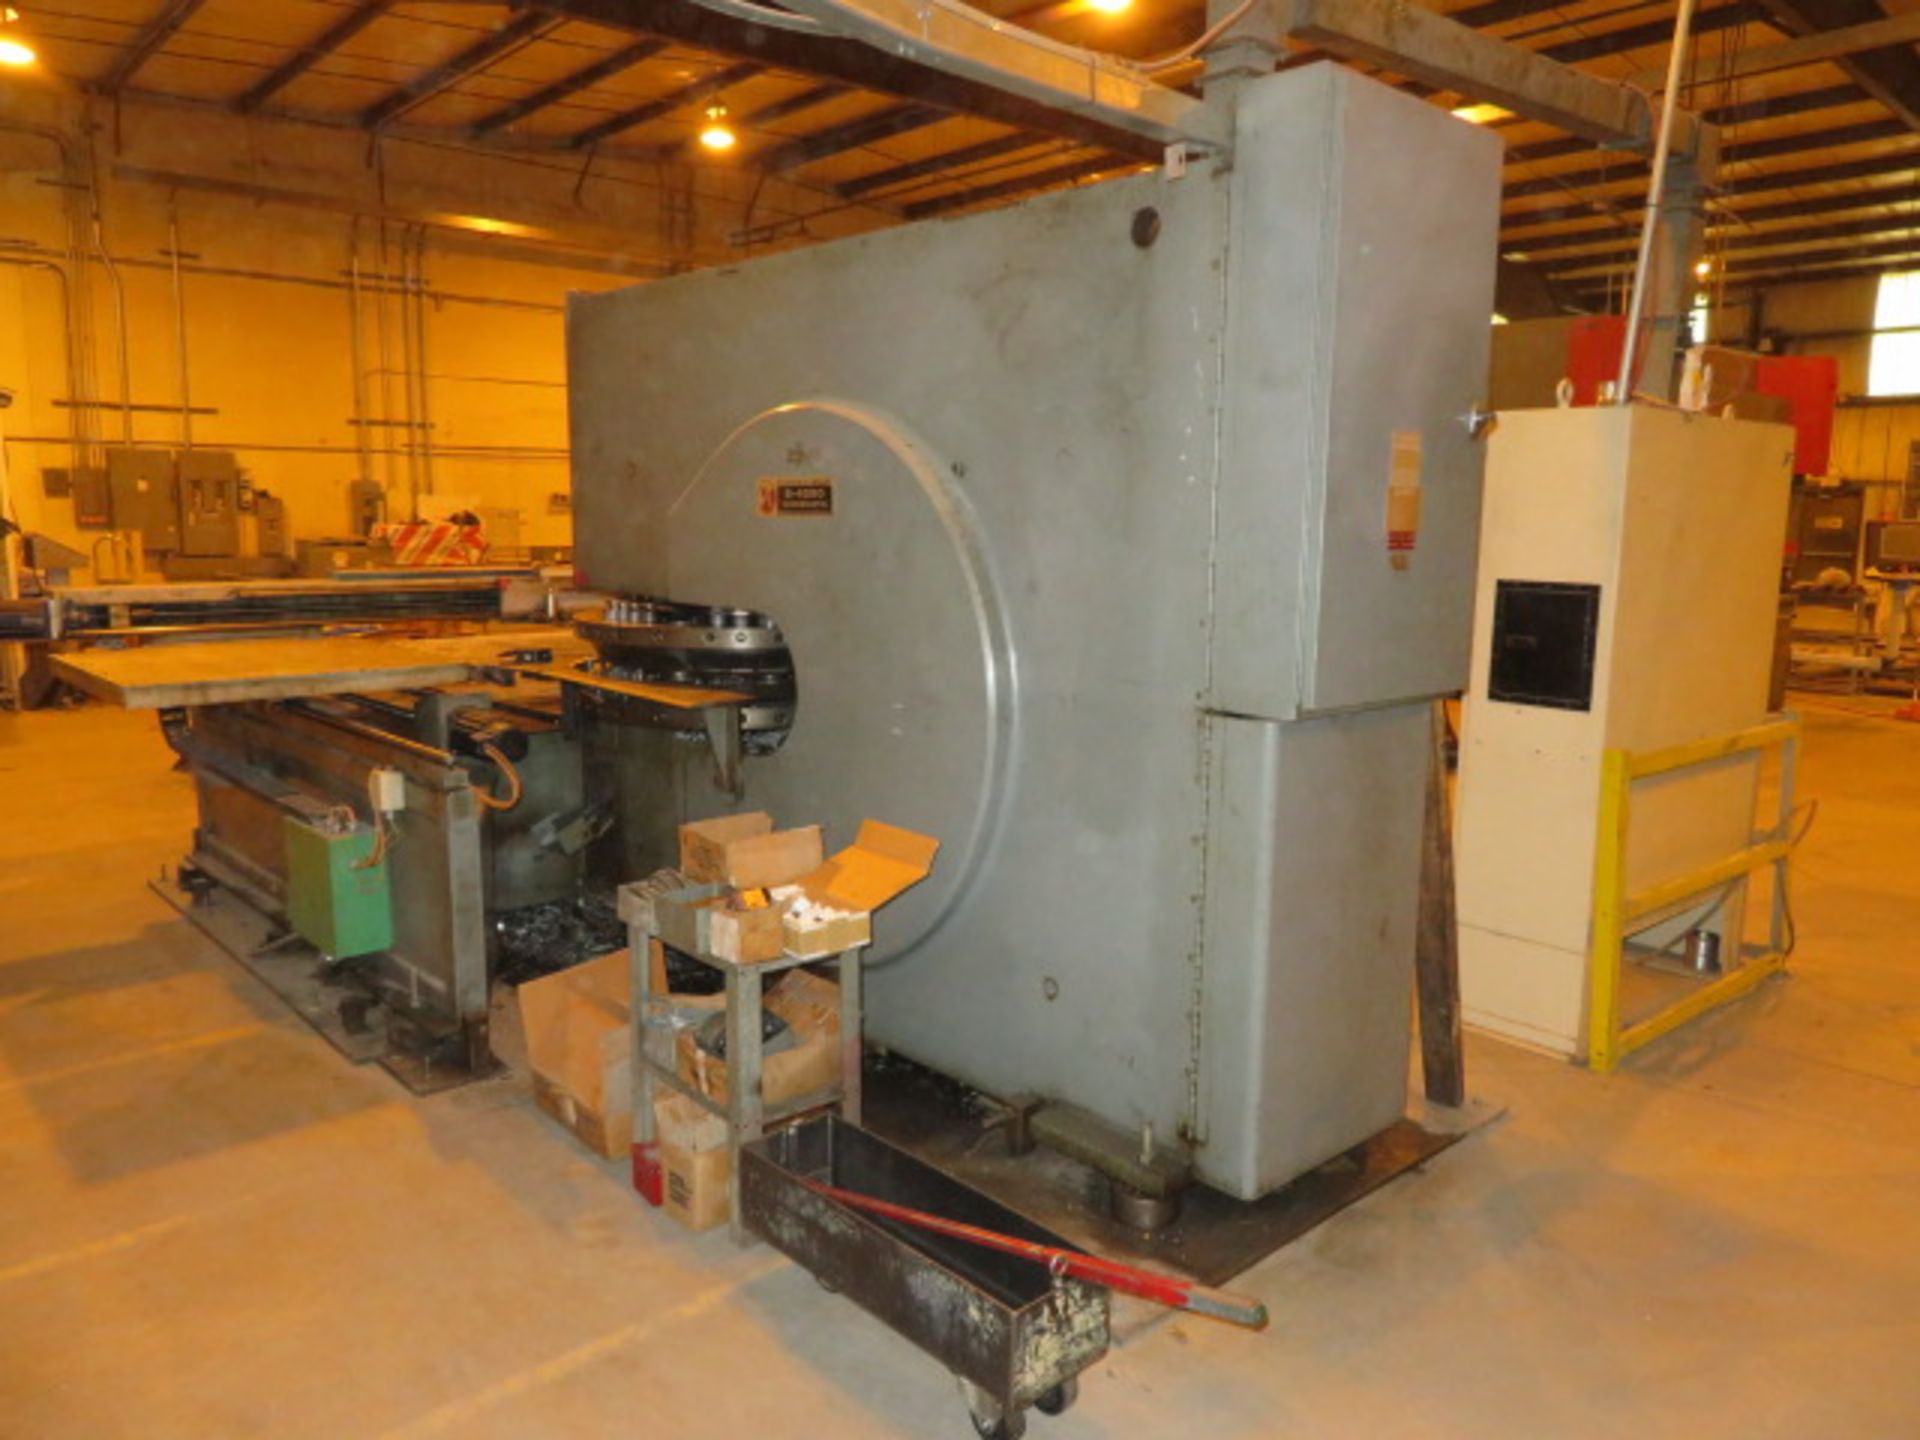 WARNER & SWASEY S4050 WIEDEMATIC CNC TURRET PUNCH, S/N 239 (RETROFITTED WITH) MILON X-CEL SLICER CNC - Image 5 of 9